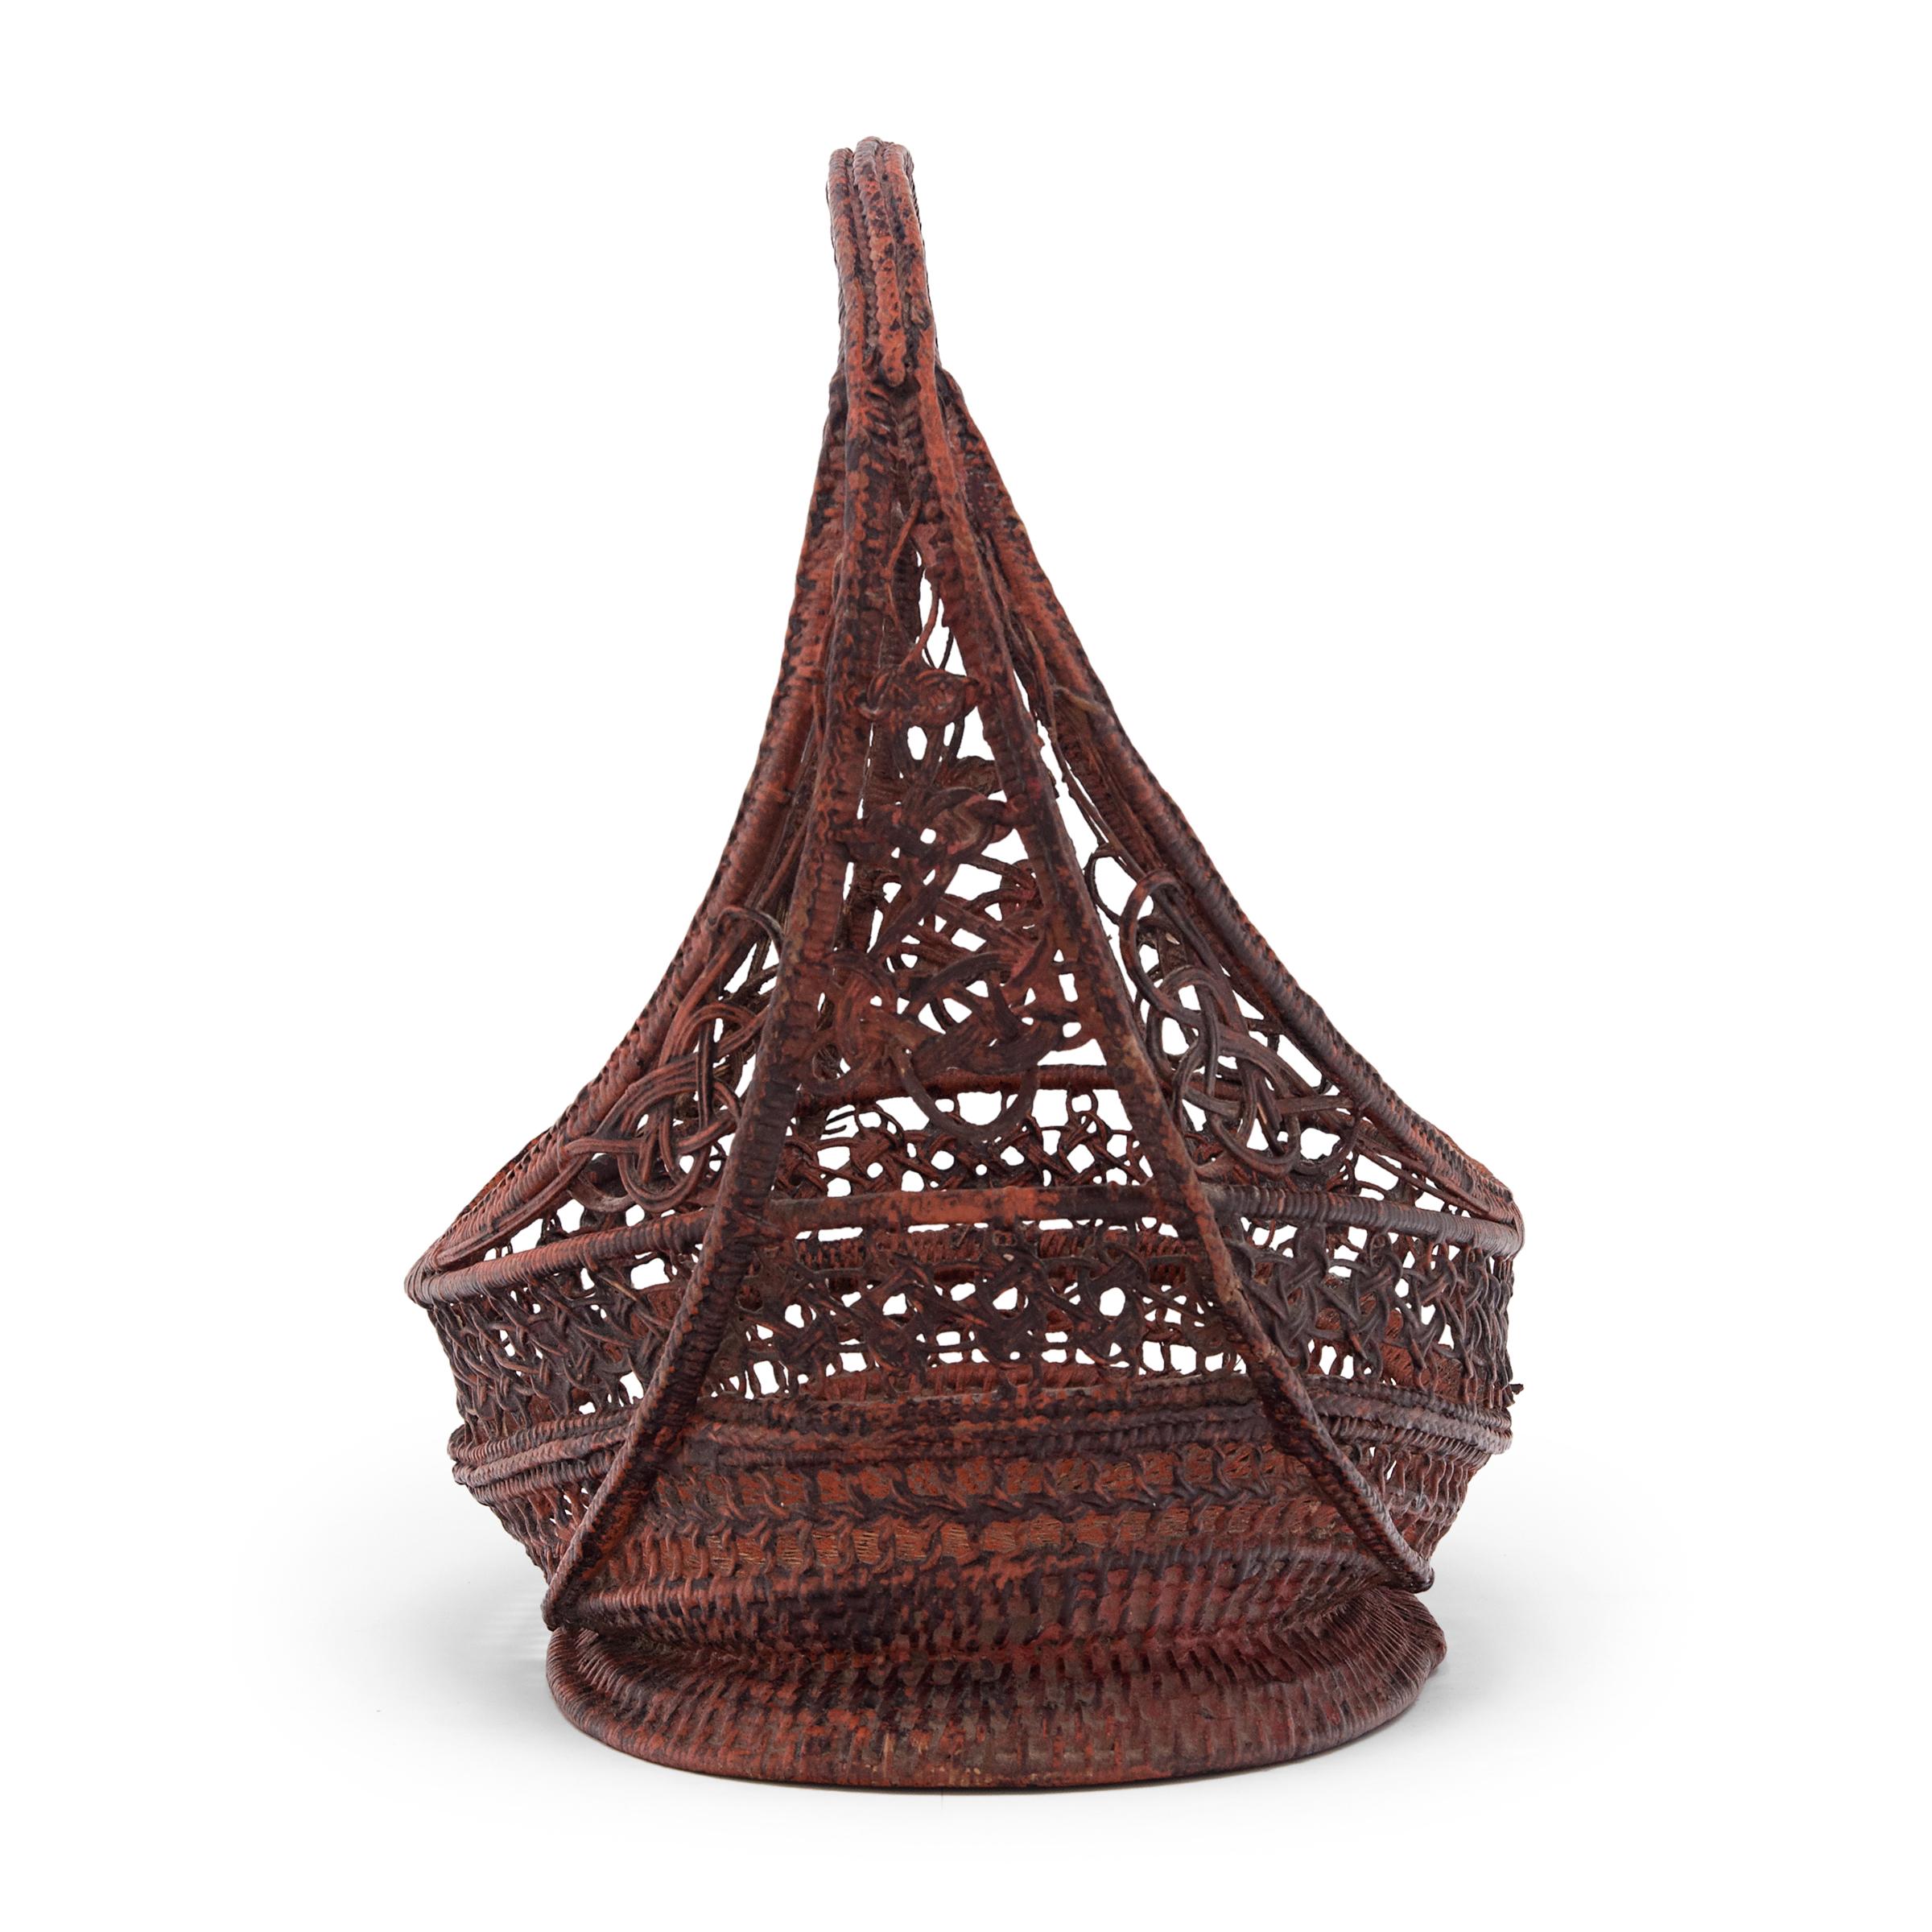 Hand-Woven Burmese Red Lacquer Flower Basket, c. 1900